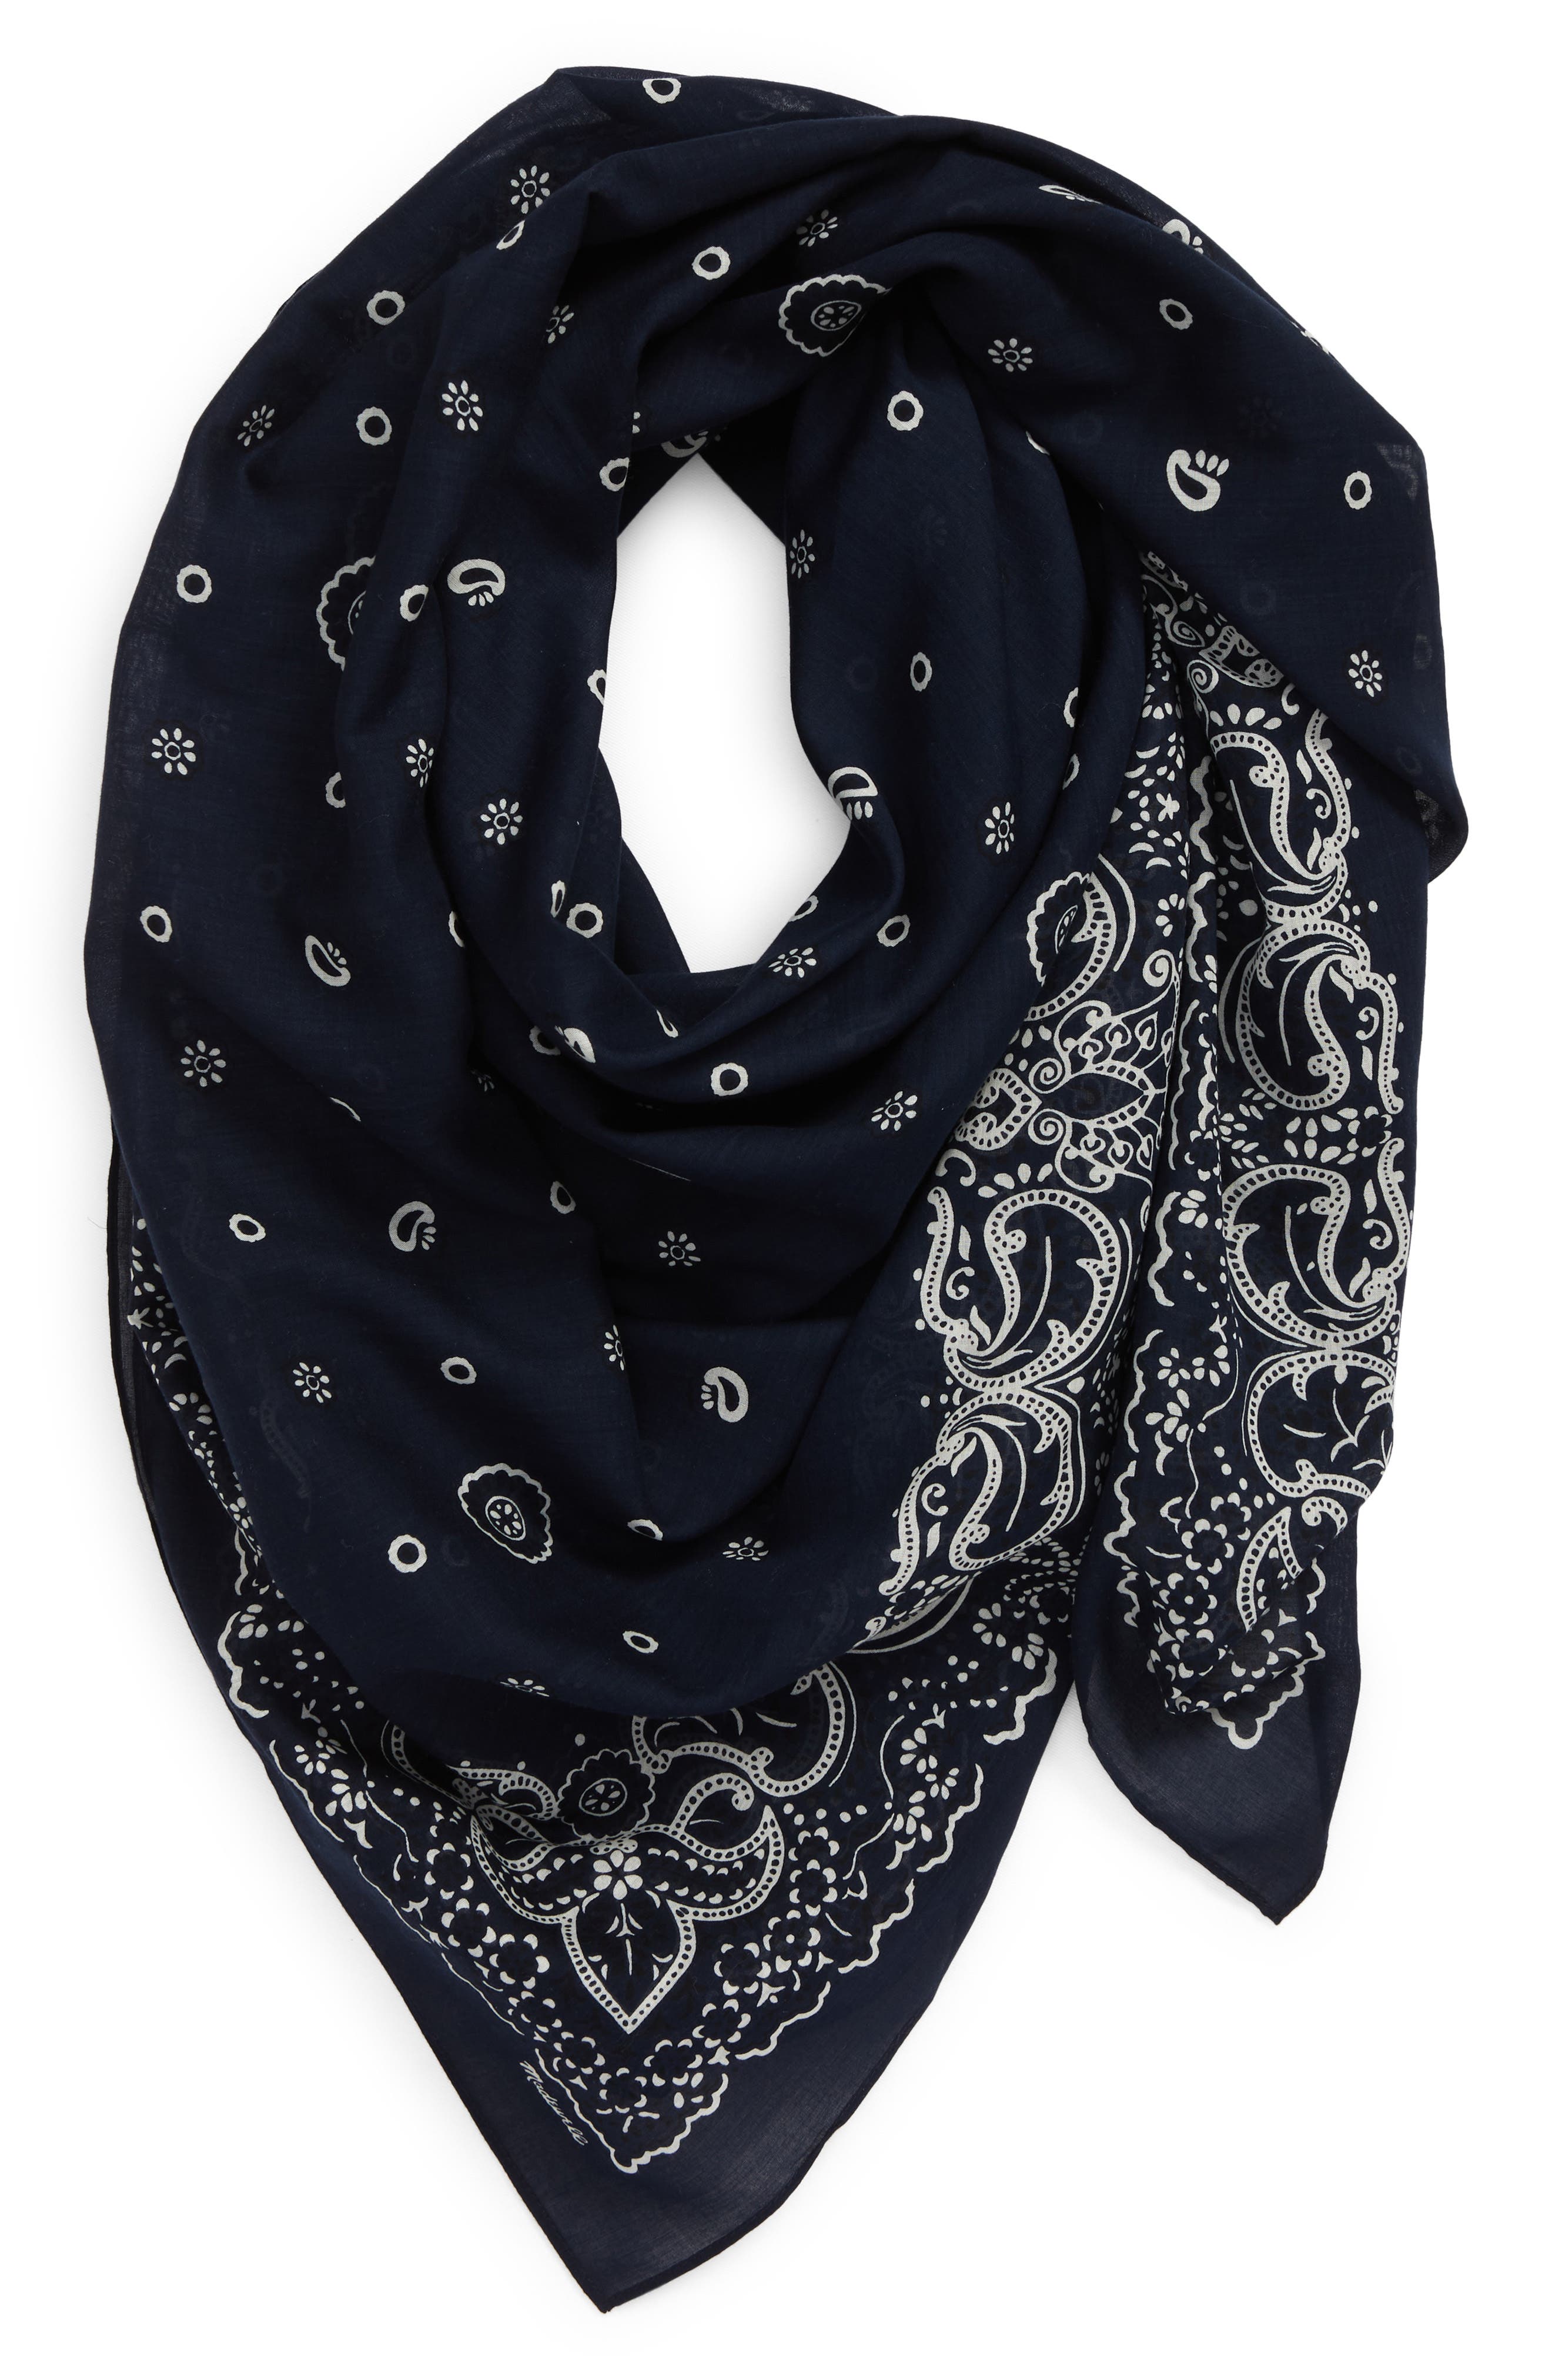 Scarf,Scarves,Wrap,Navy Black,Red,White...Silky Chiffon Paisley Style Scarf 003 